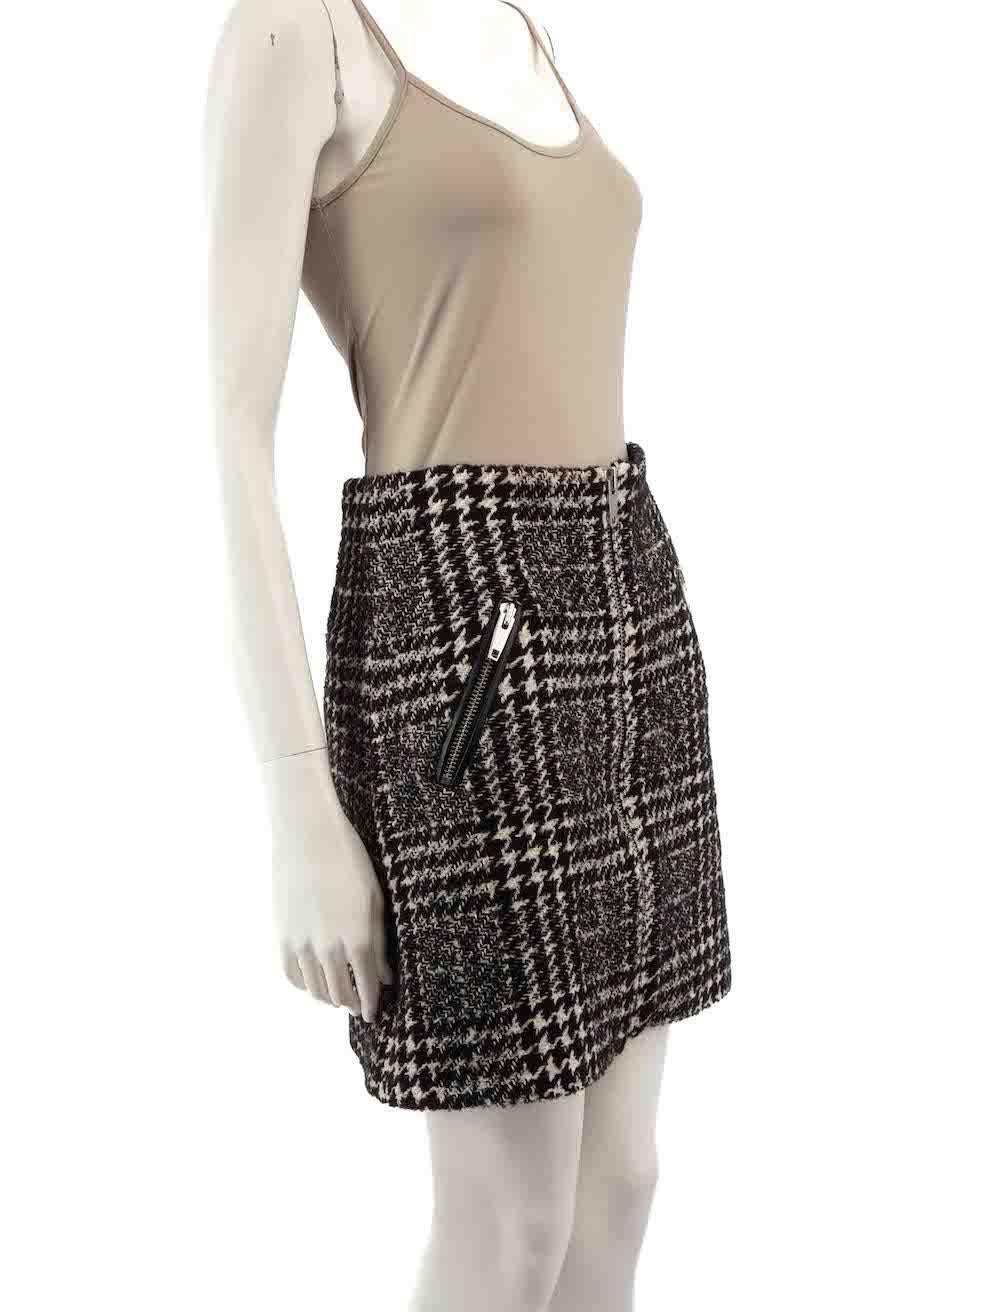 CONDITION is Very good. Hardly any visible wear to skirt is evident on this used The Kooples designer resale item.
 
 
 
 Details
 
 
 Black
 
 Synthetic
 
 Skirt
 
 Houndstooth pattern
 
 A-line
 
 Mini
 
 Front zip fastening
 
 2x Side pockets
 
